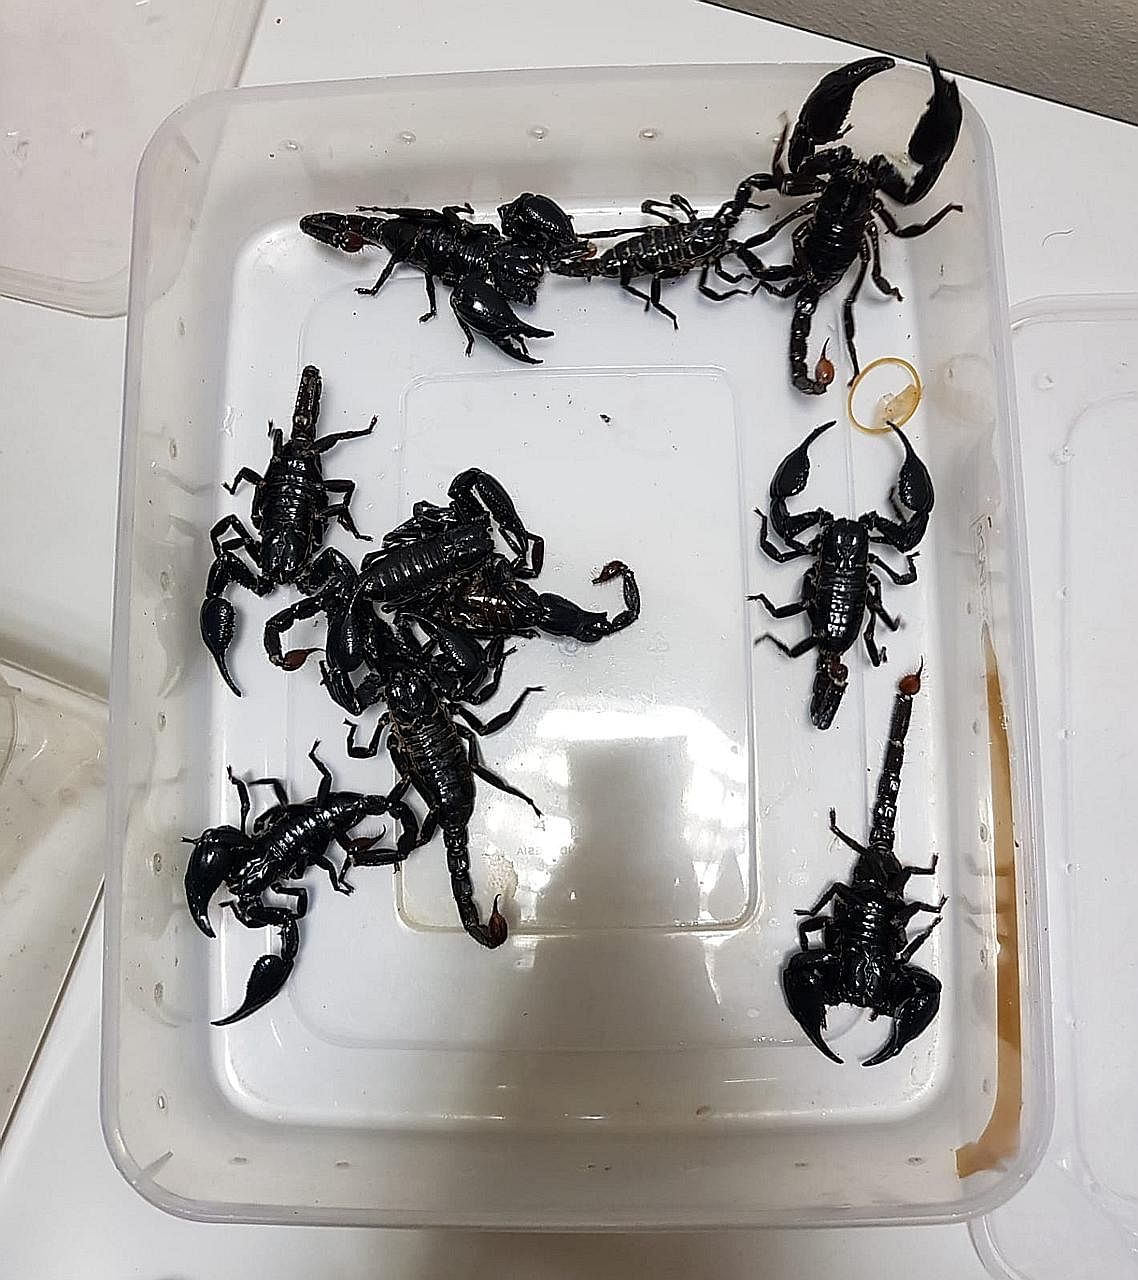 ICA said the scorpions were hidden in a tissue box on the dashboard of a car. Two Singaporean men were in the vehicle.